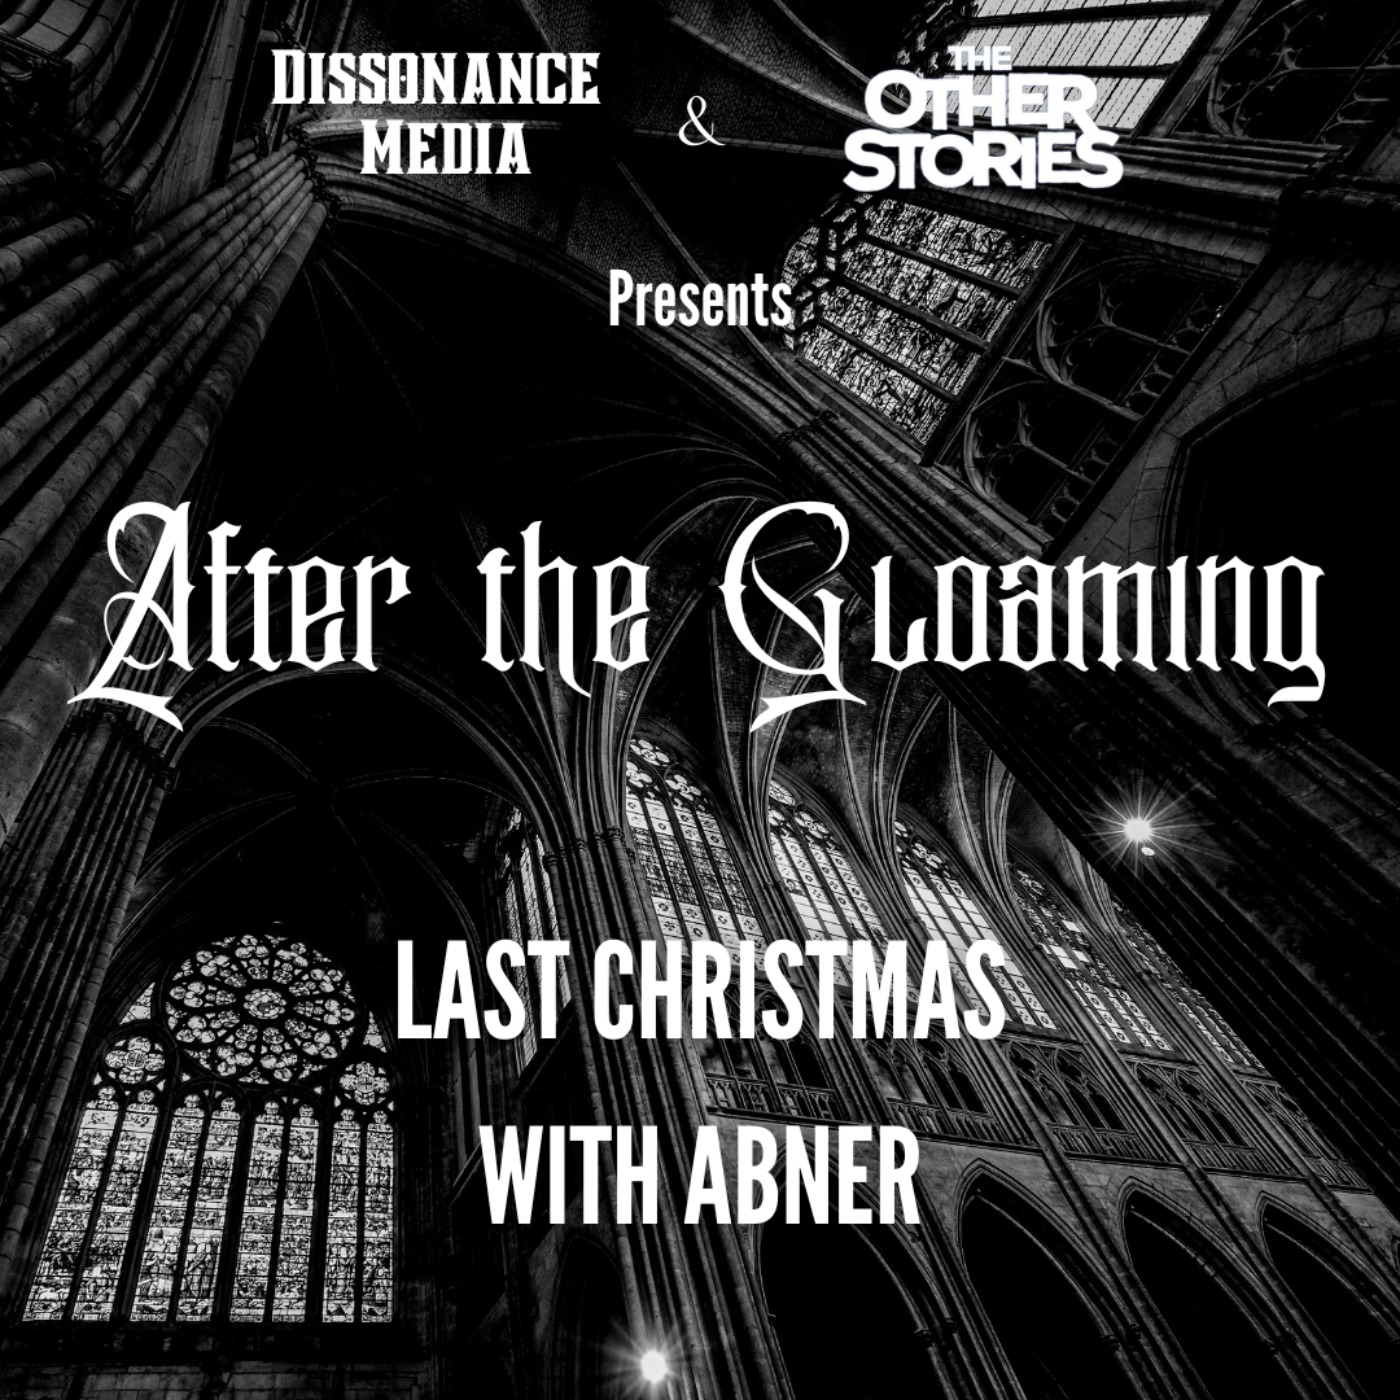 Last Christmas with Abner